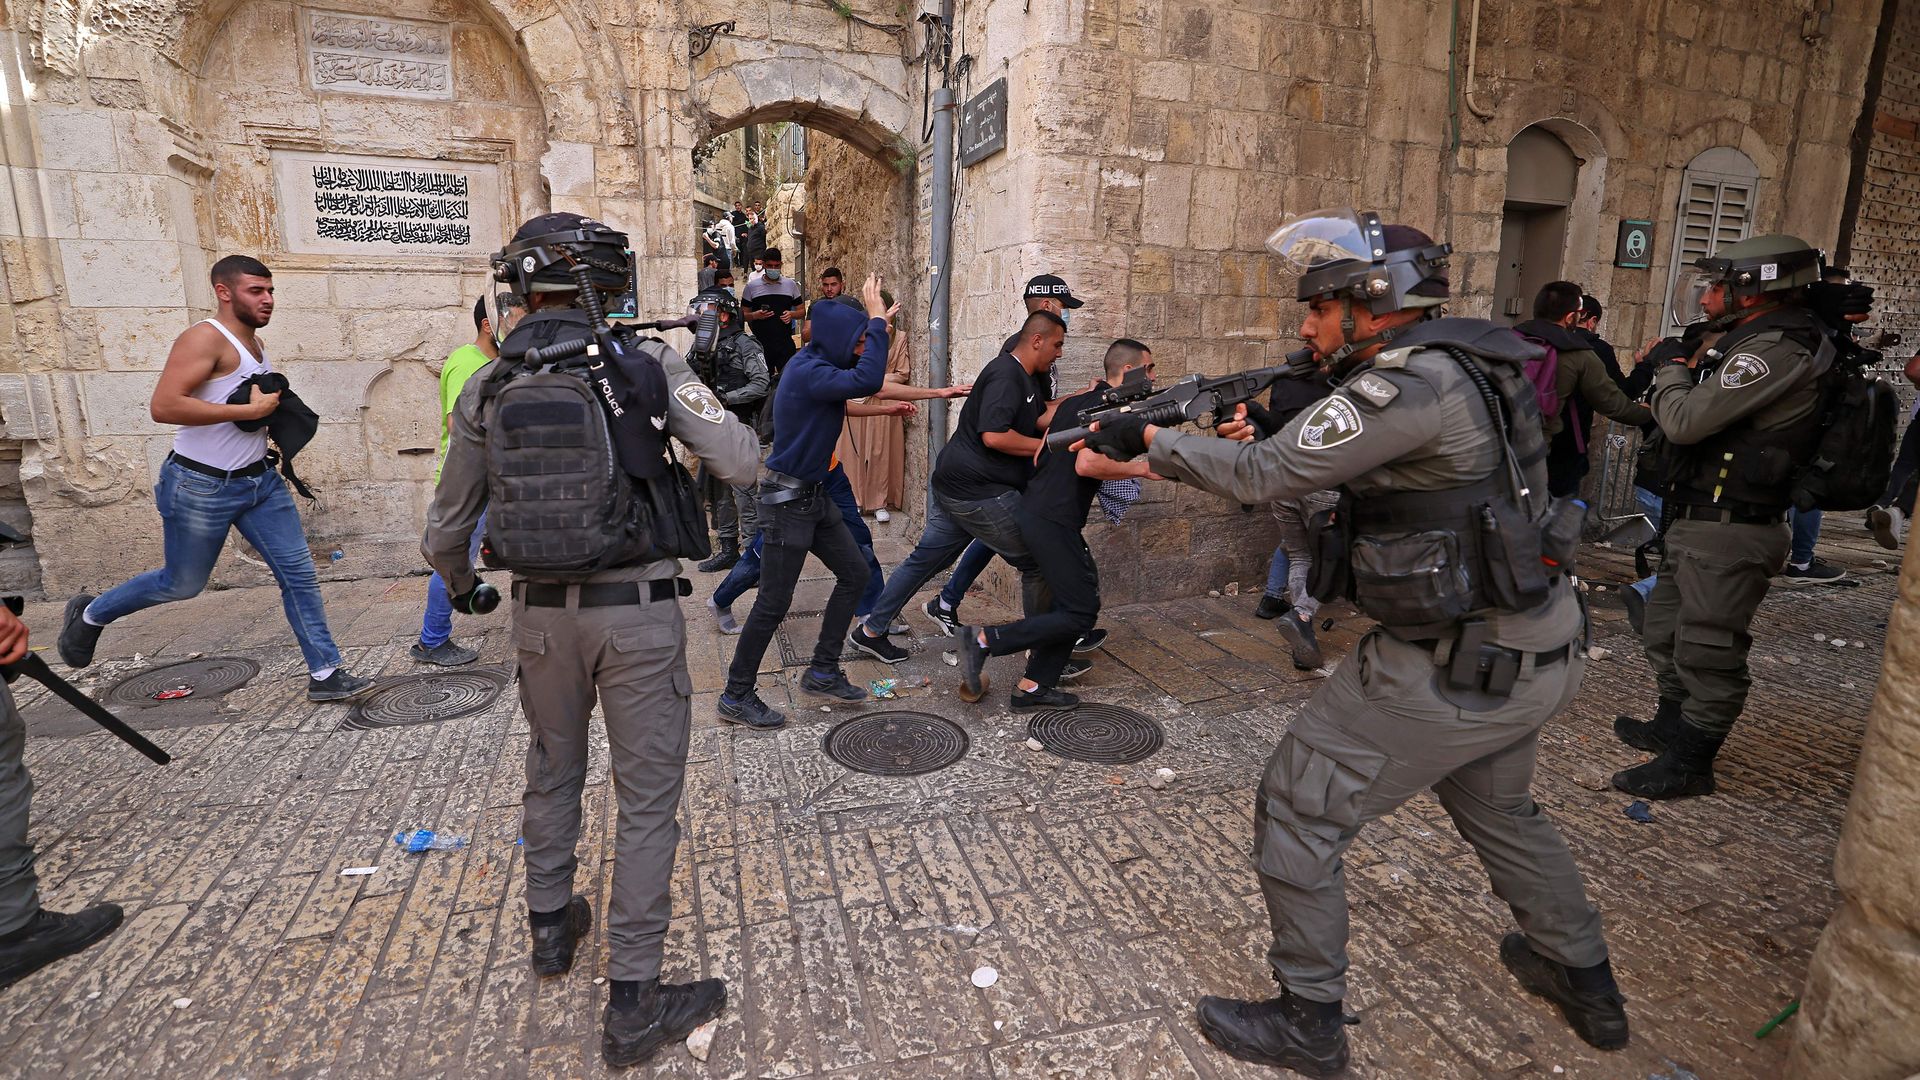  Palestinian protesters run from Israeli security forces amid clashes in Jerusalem's Old City on May 10